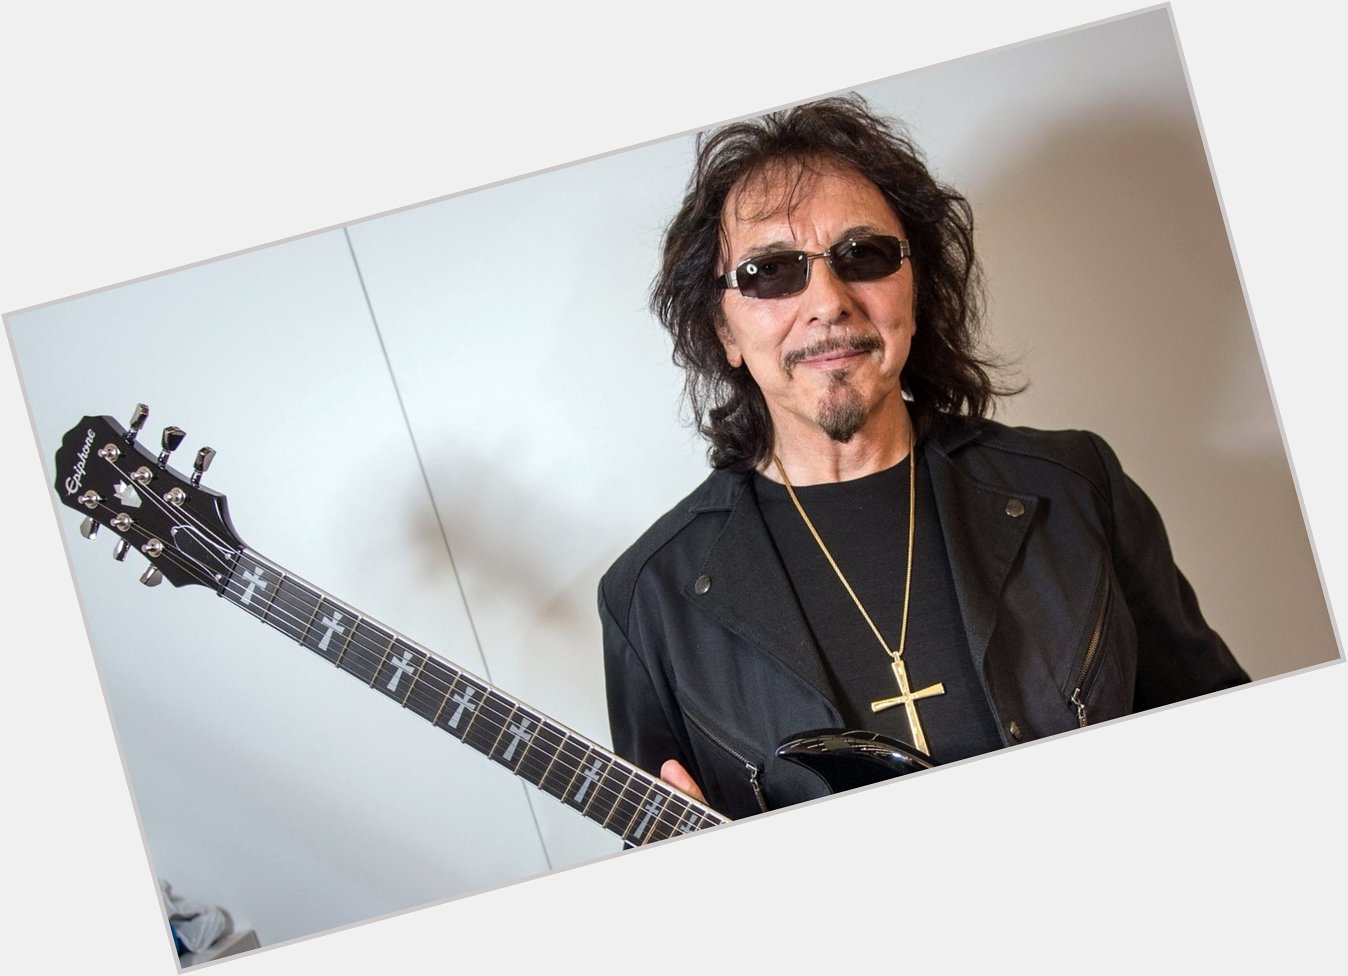 Please join me here at in wishing the one and only Tony Iommi a very Happy 73rd Birthday toady  